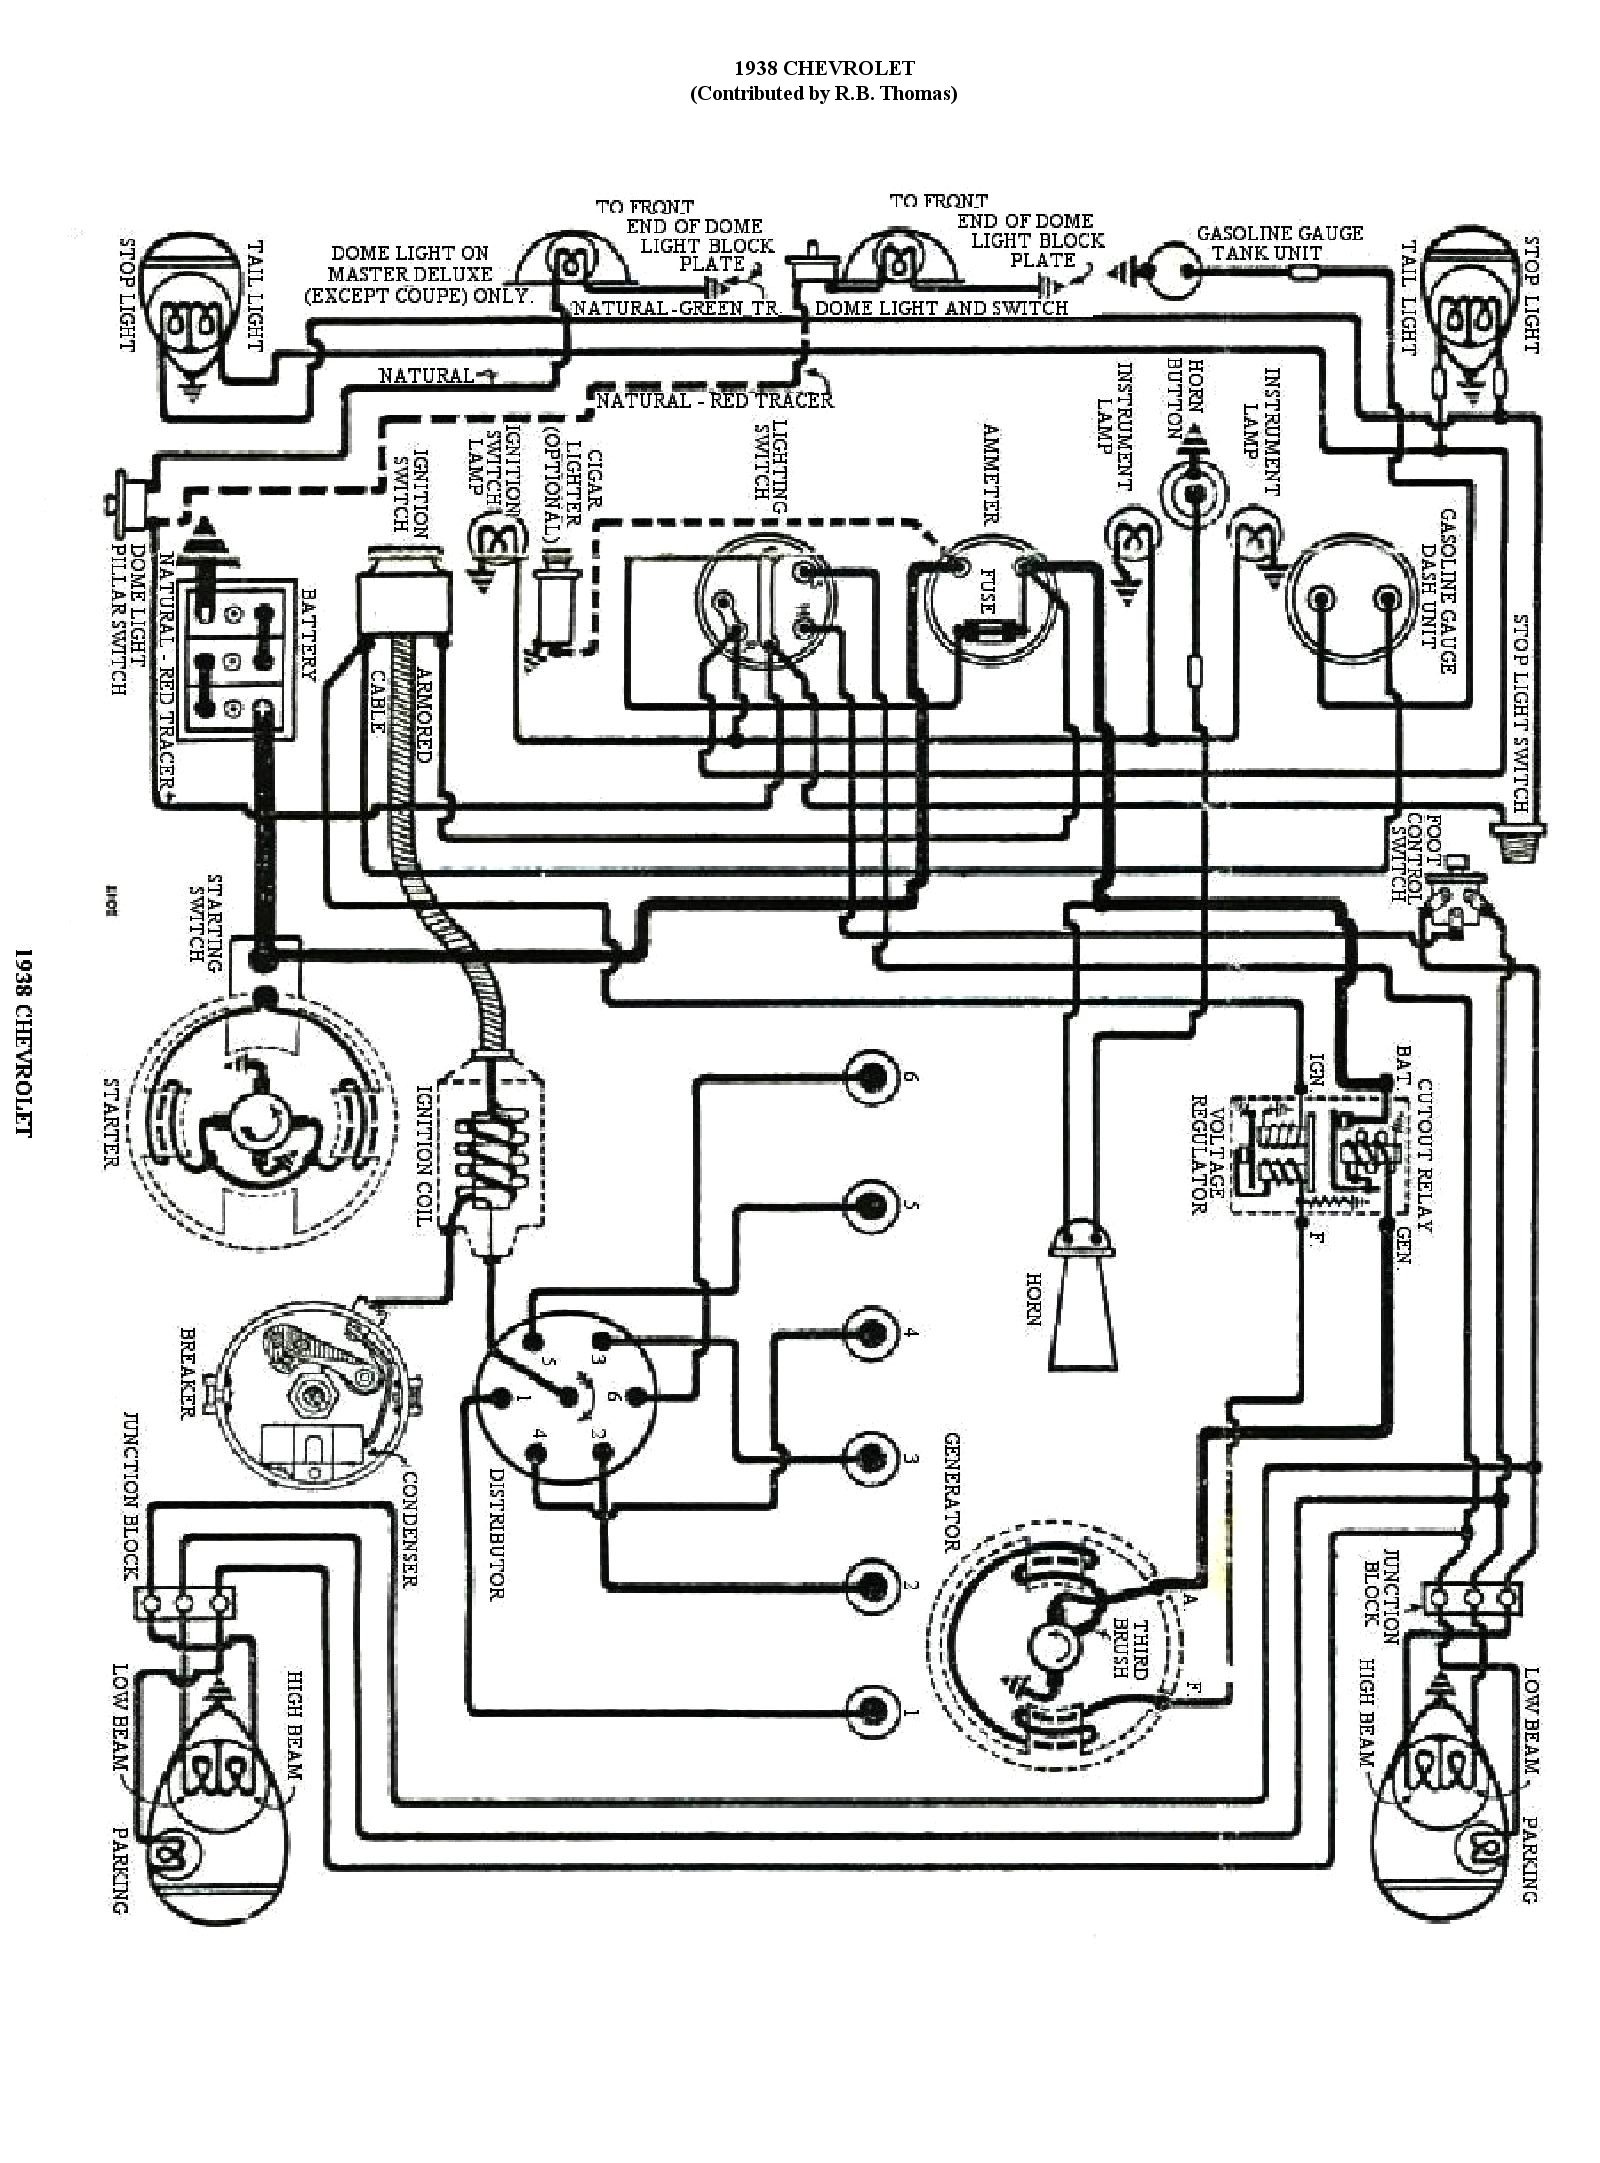 Chevy Wiring diagrams 1927 buick wiring diagram 